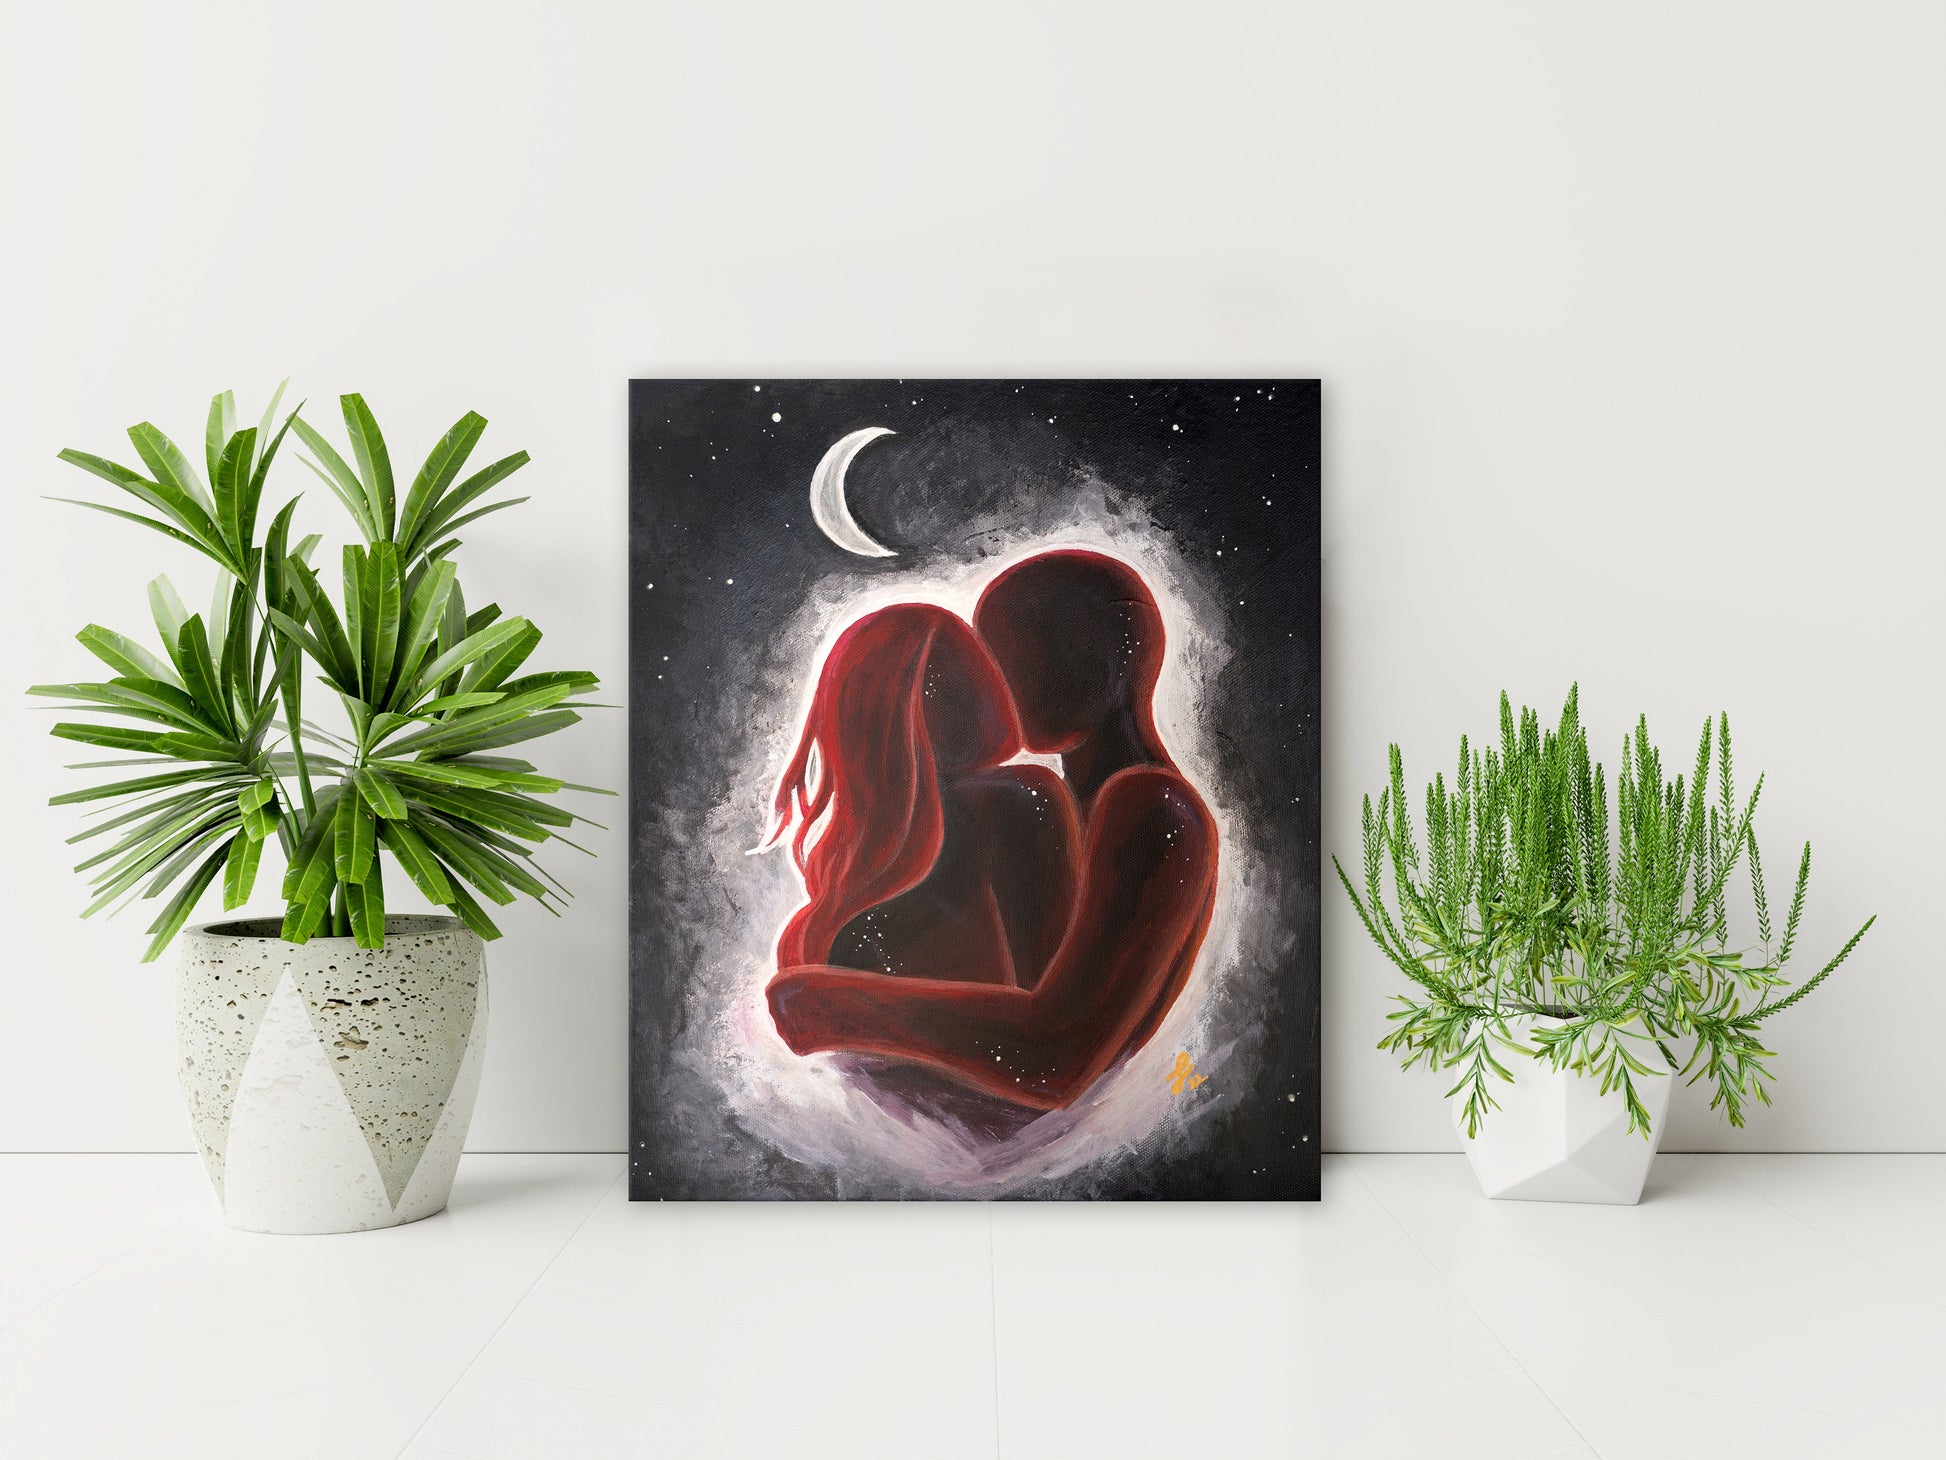 Lovers in the night 10x12 - Original acrylic painting on recycled canvas